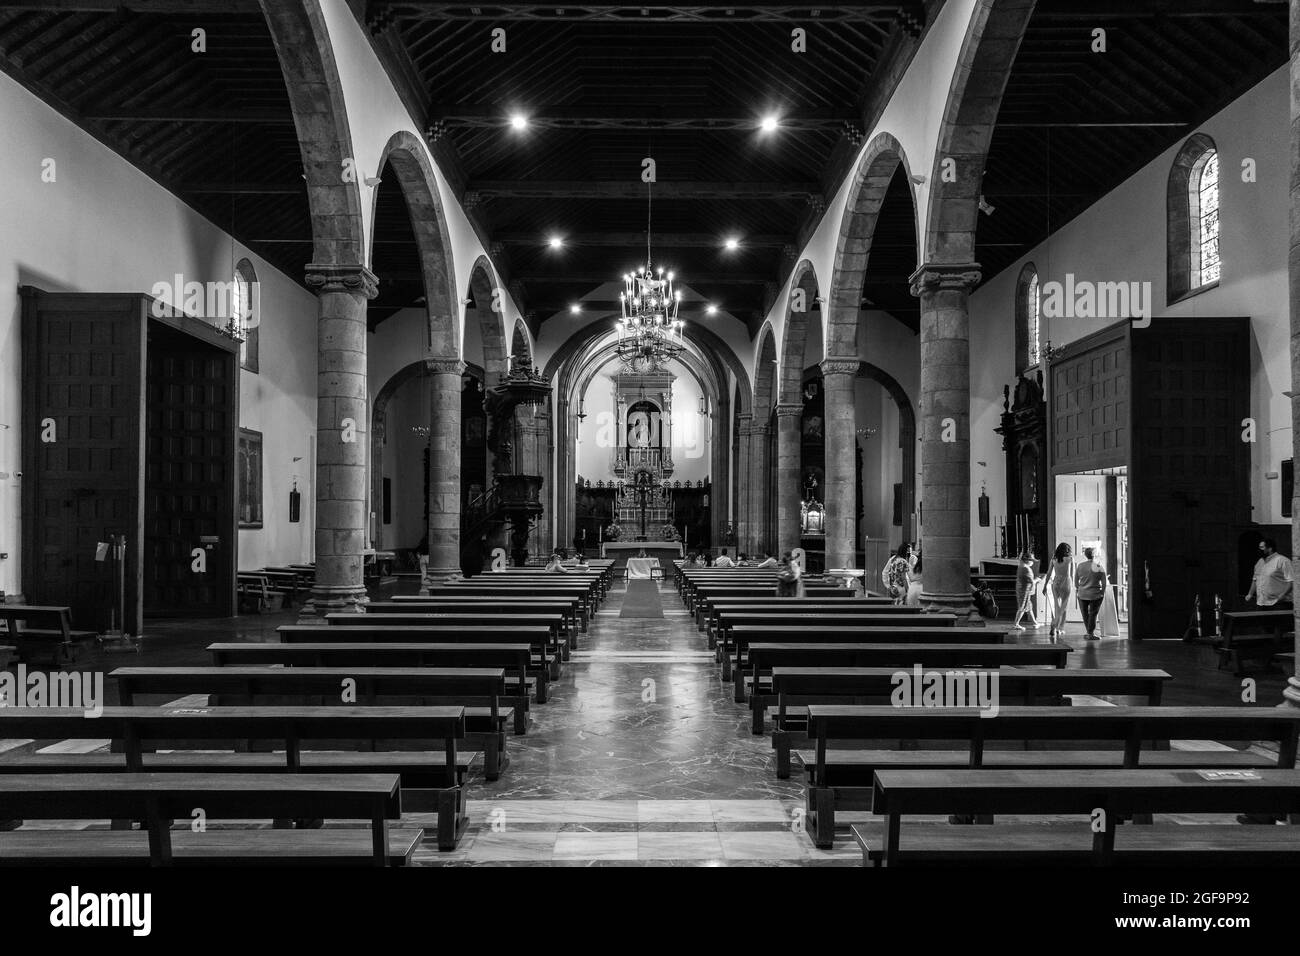 SAN CRISTOBAL DE LA LAGUNA, CANARY ISLANDS, TENERIFE - JULY 03, 2021: Interior of Church of the Immaculate Conception. Black and white. Stock Photo